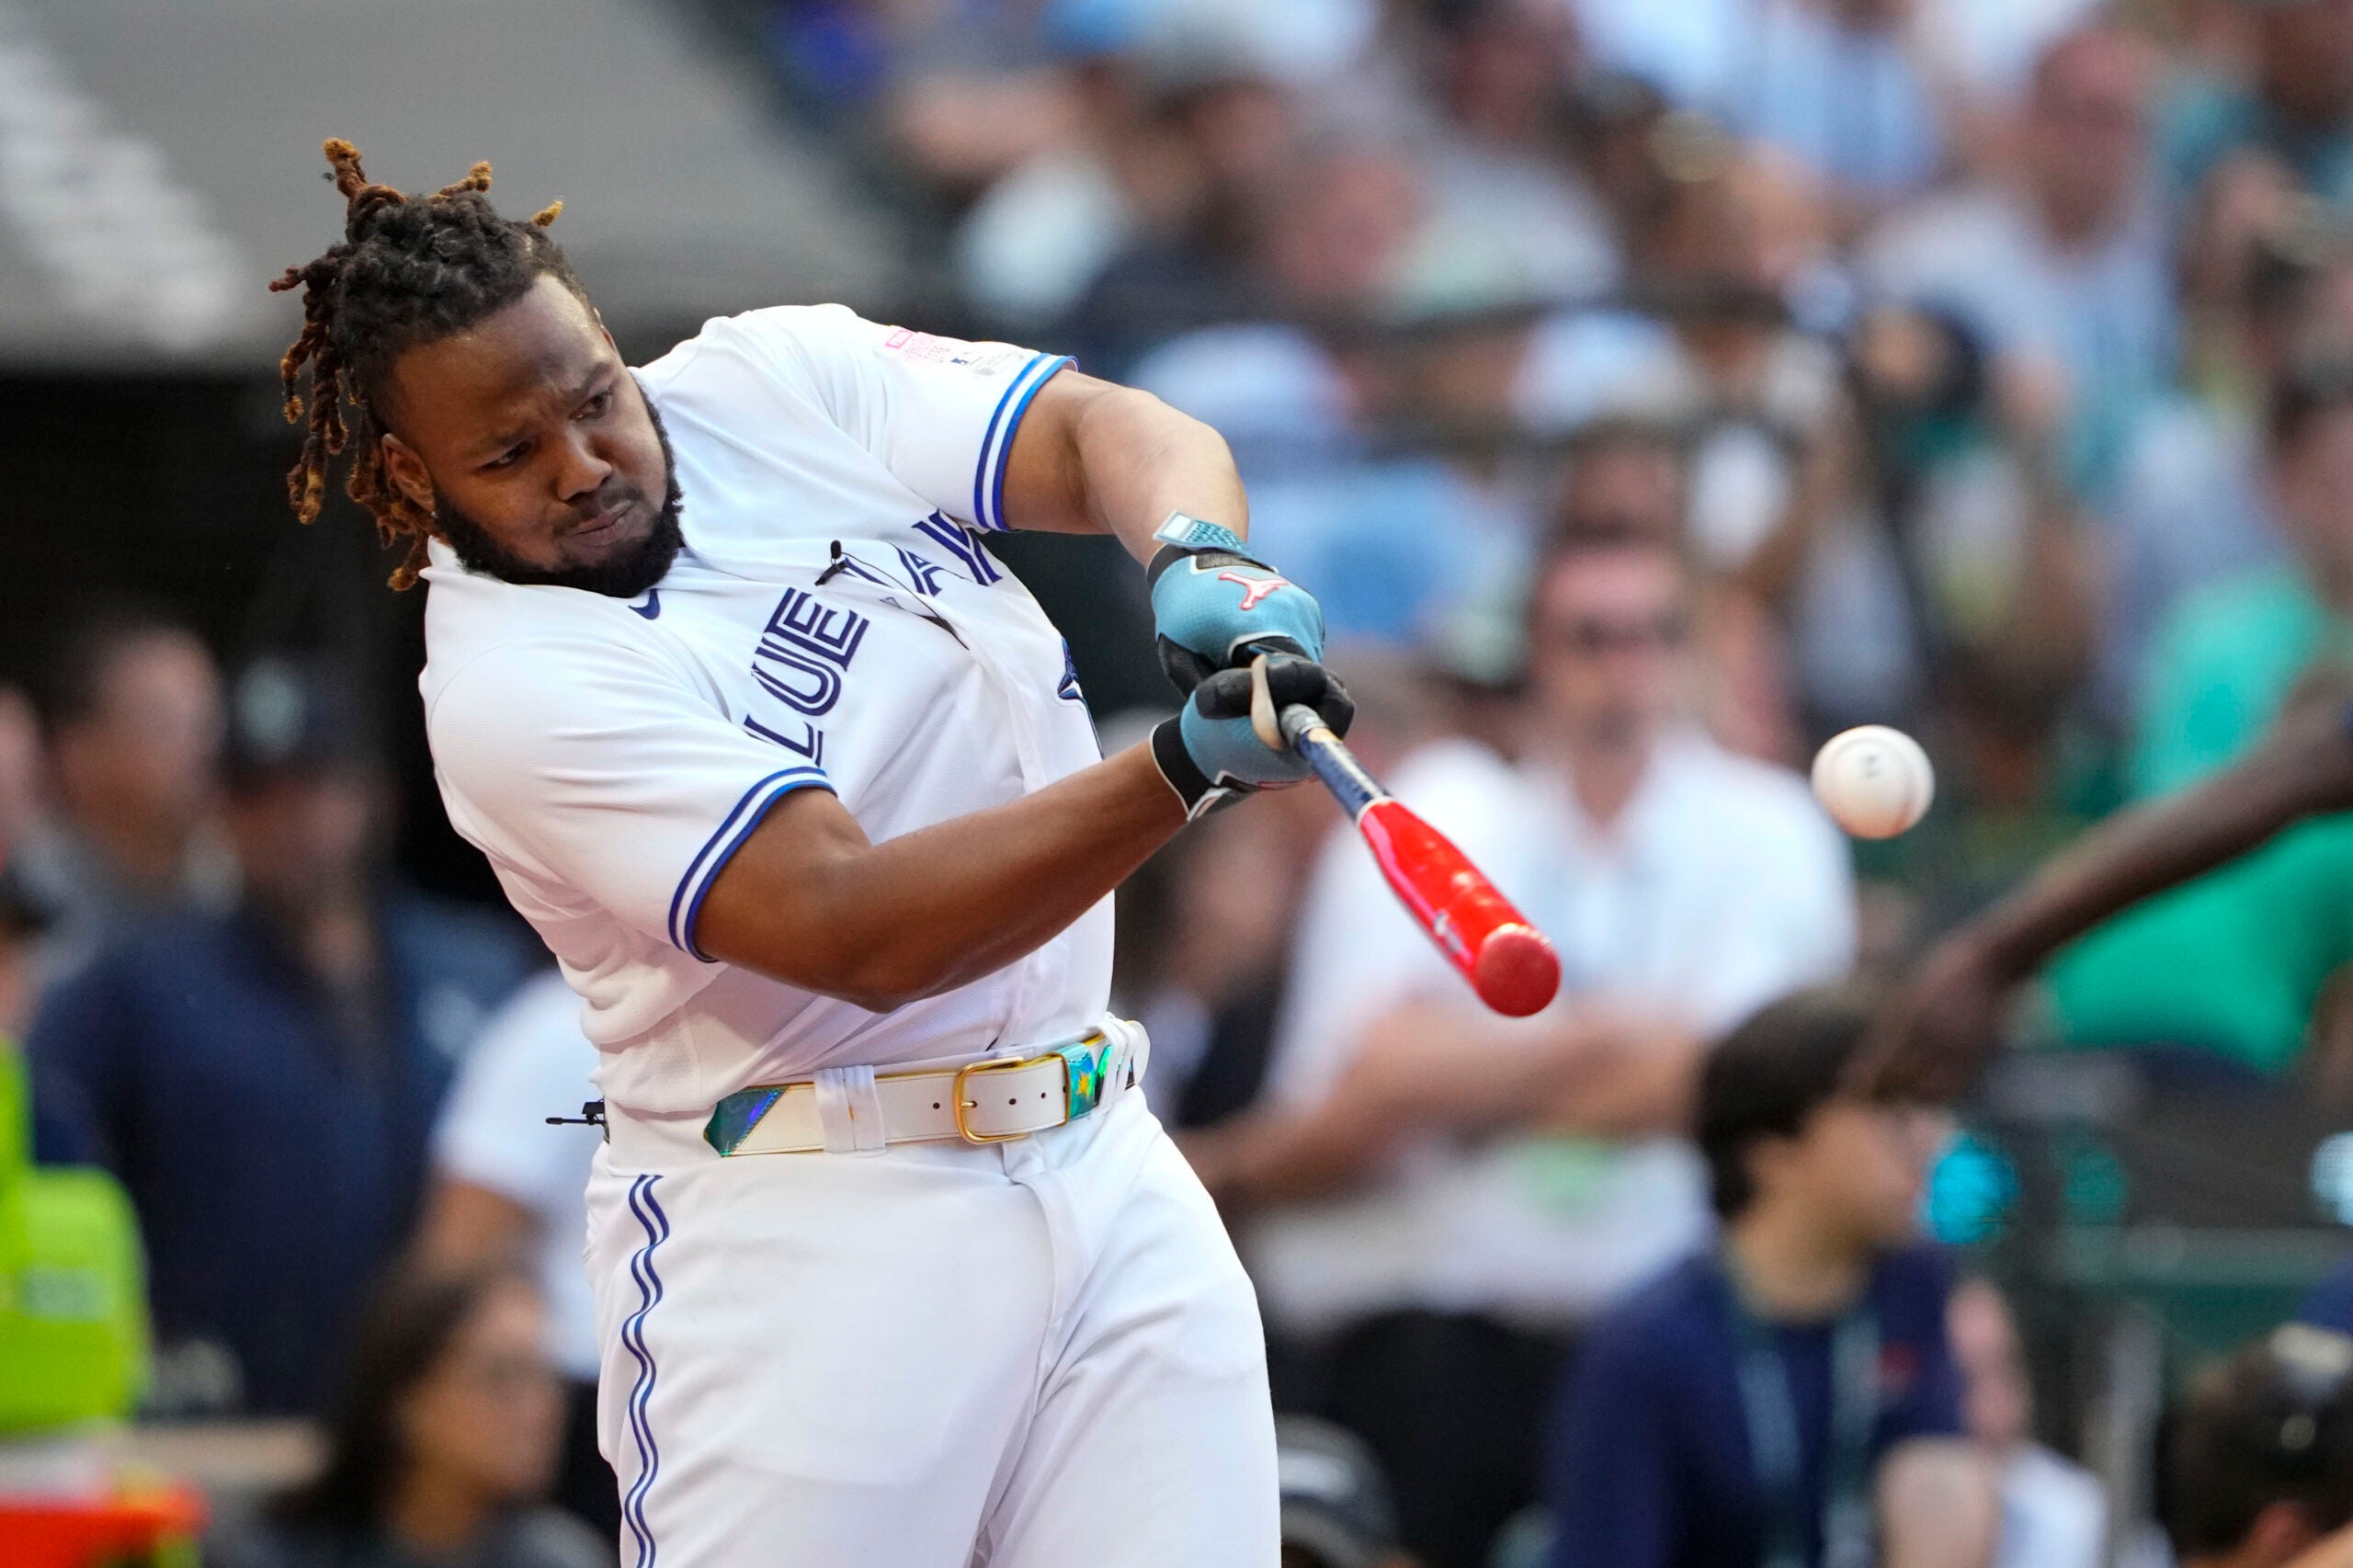 American League's Vladimir Guerrero Jr., of the Toronto Blue Jays, hits in the semifinal round during the MLB All-Star baseball Home Run Derby in Seattle.